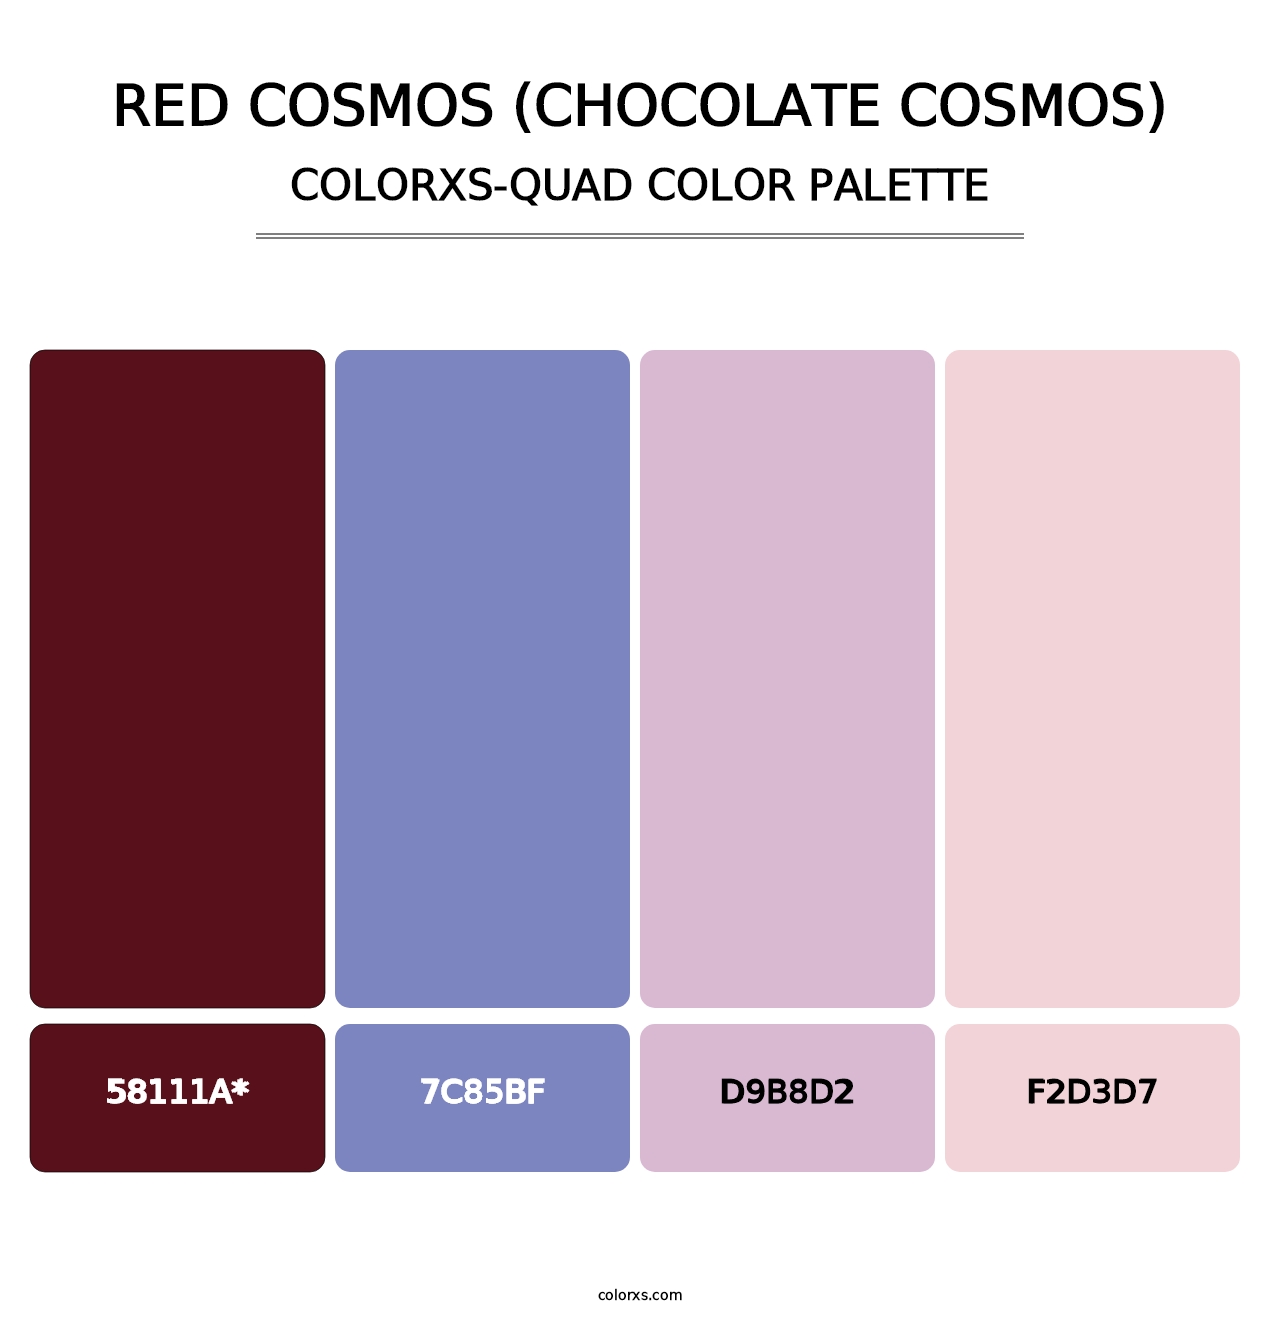 Red Cosmos (Chocolate Cosmos) - Colorxs Quad Palette